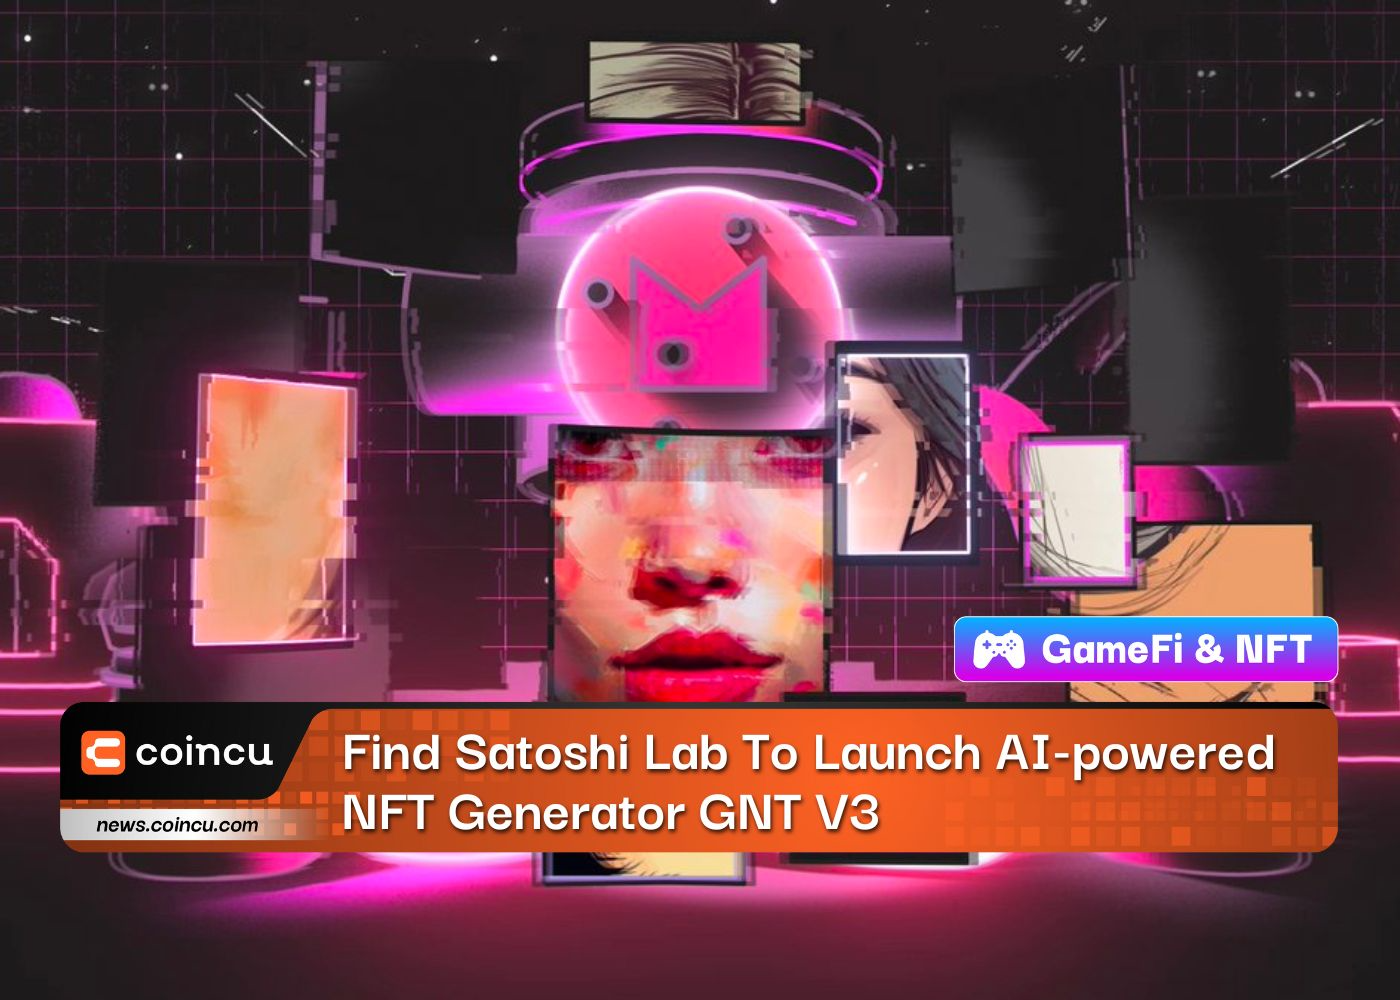 Find Satoshi Lab To Launch AI-powered NFT Generator GNT V3